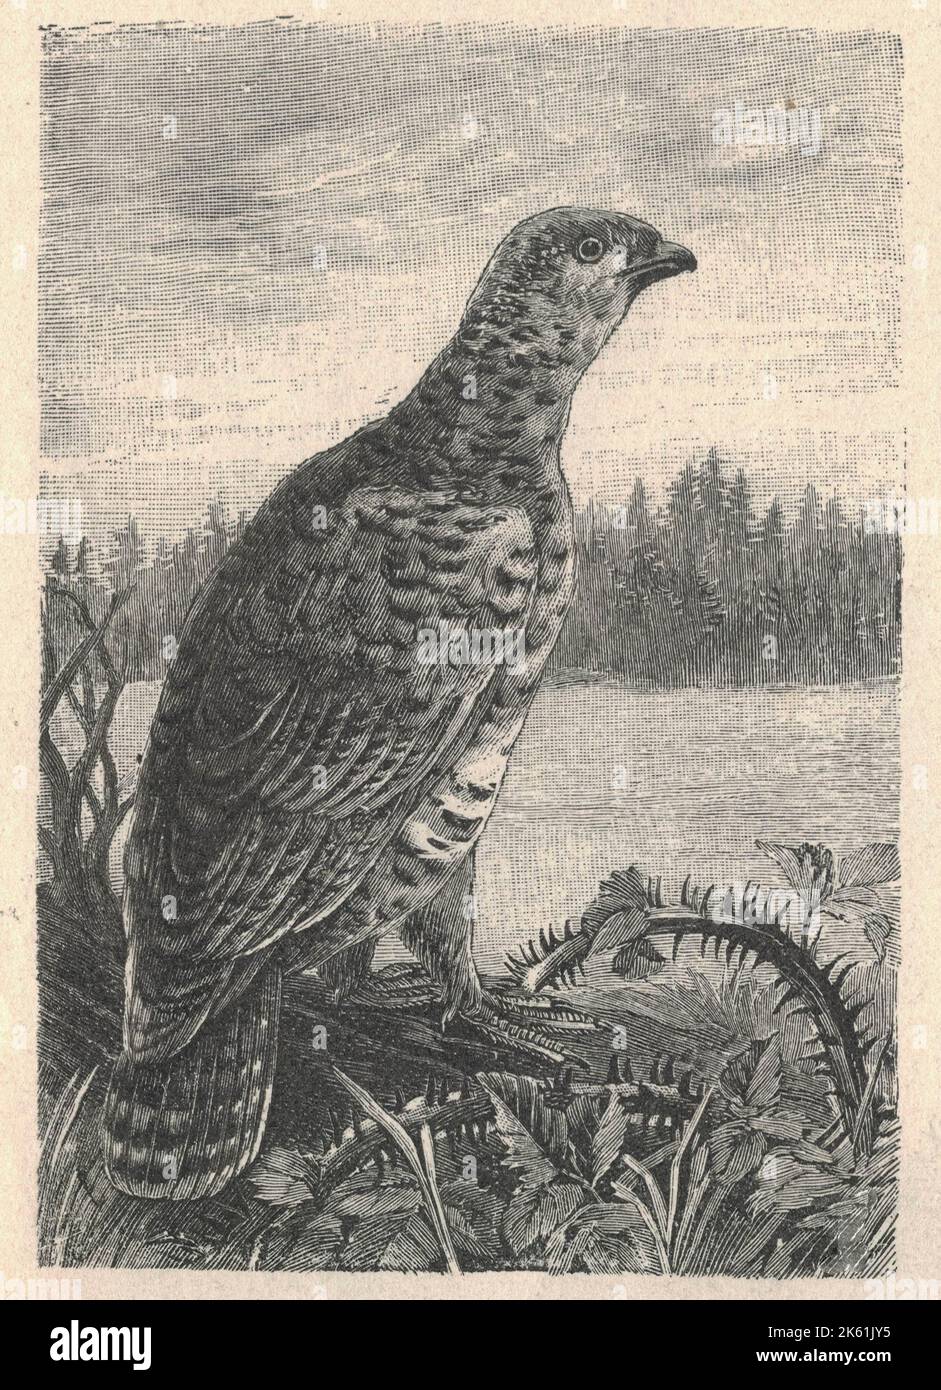 Antique engraved illustration of the female grouse. Vintage illustration of the female grouse. Old engraved picture of the bird. Grouse are heavily built like other Galliformes, such as chickens. They range in length from 31 to 95 cm (12 to 37+1⁄2 in), and in weight from 0.3 to 6.5 kg (3⁄4 to 14+1⁄4 lb). Males are larger than females—twice as heavy in the western capercaillie, the largest member of the family. Grouse have feathered nostrils. Their legs are covered in feathers down to the toes, and in winter the toes, too, have feathers or small scales on the sides, an adaptation for walking on Stock Photo